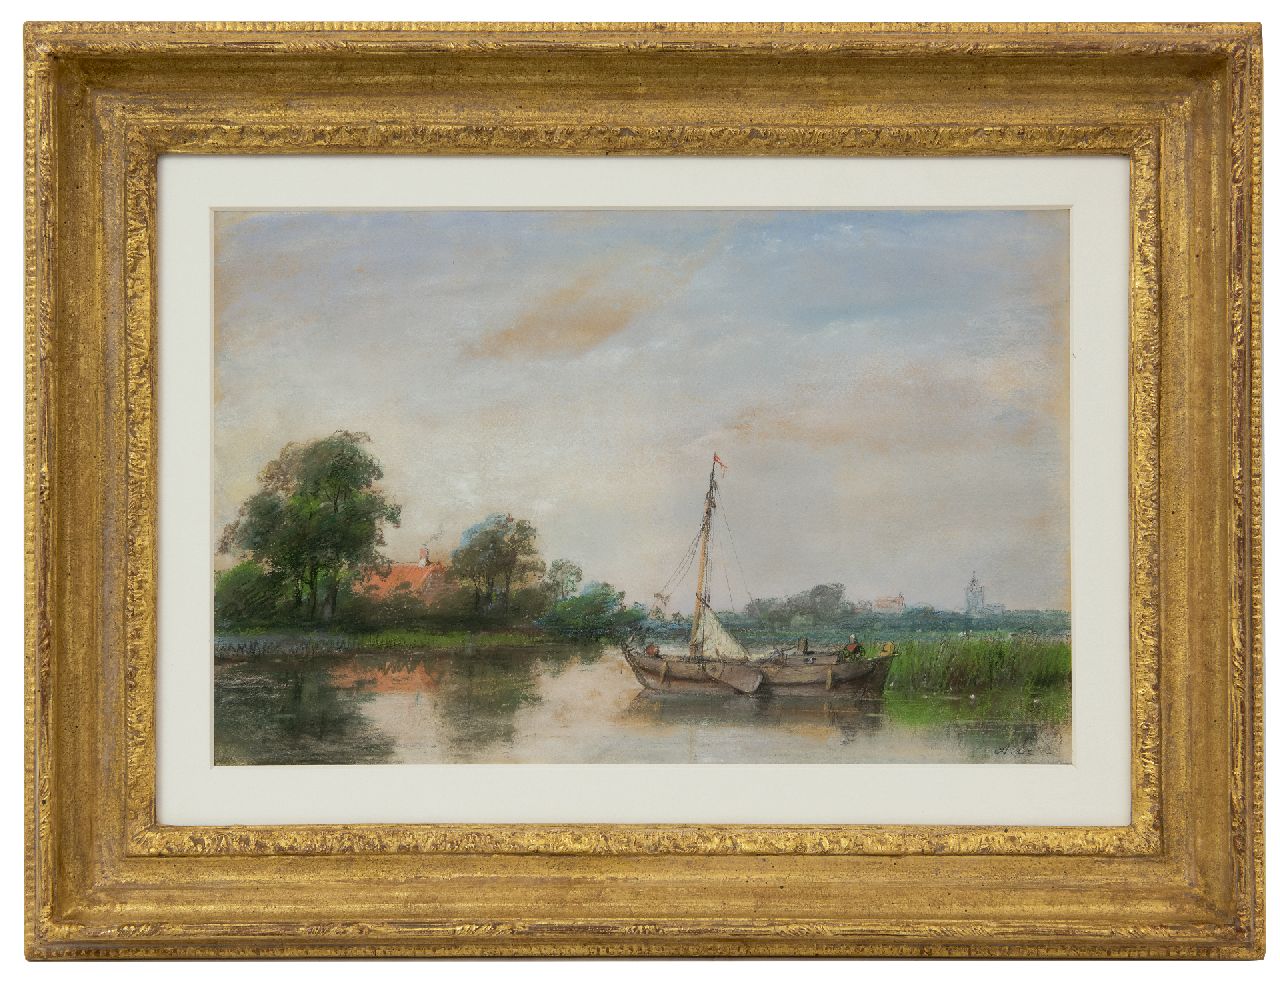 Schelfhout A.  | Andreas Schelfhout, Moored sailing ship in a landscape, pencil and pastel on paper 24.3 x 37.5 cm, signed l.r. with initials